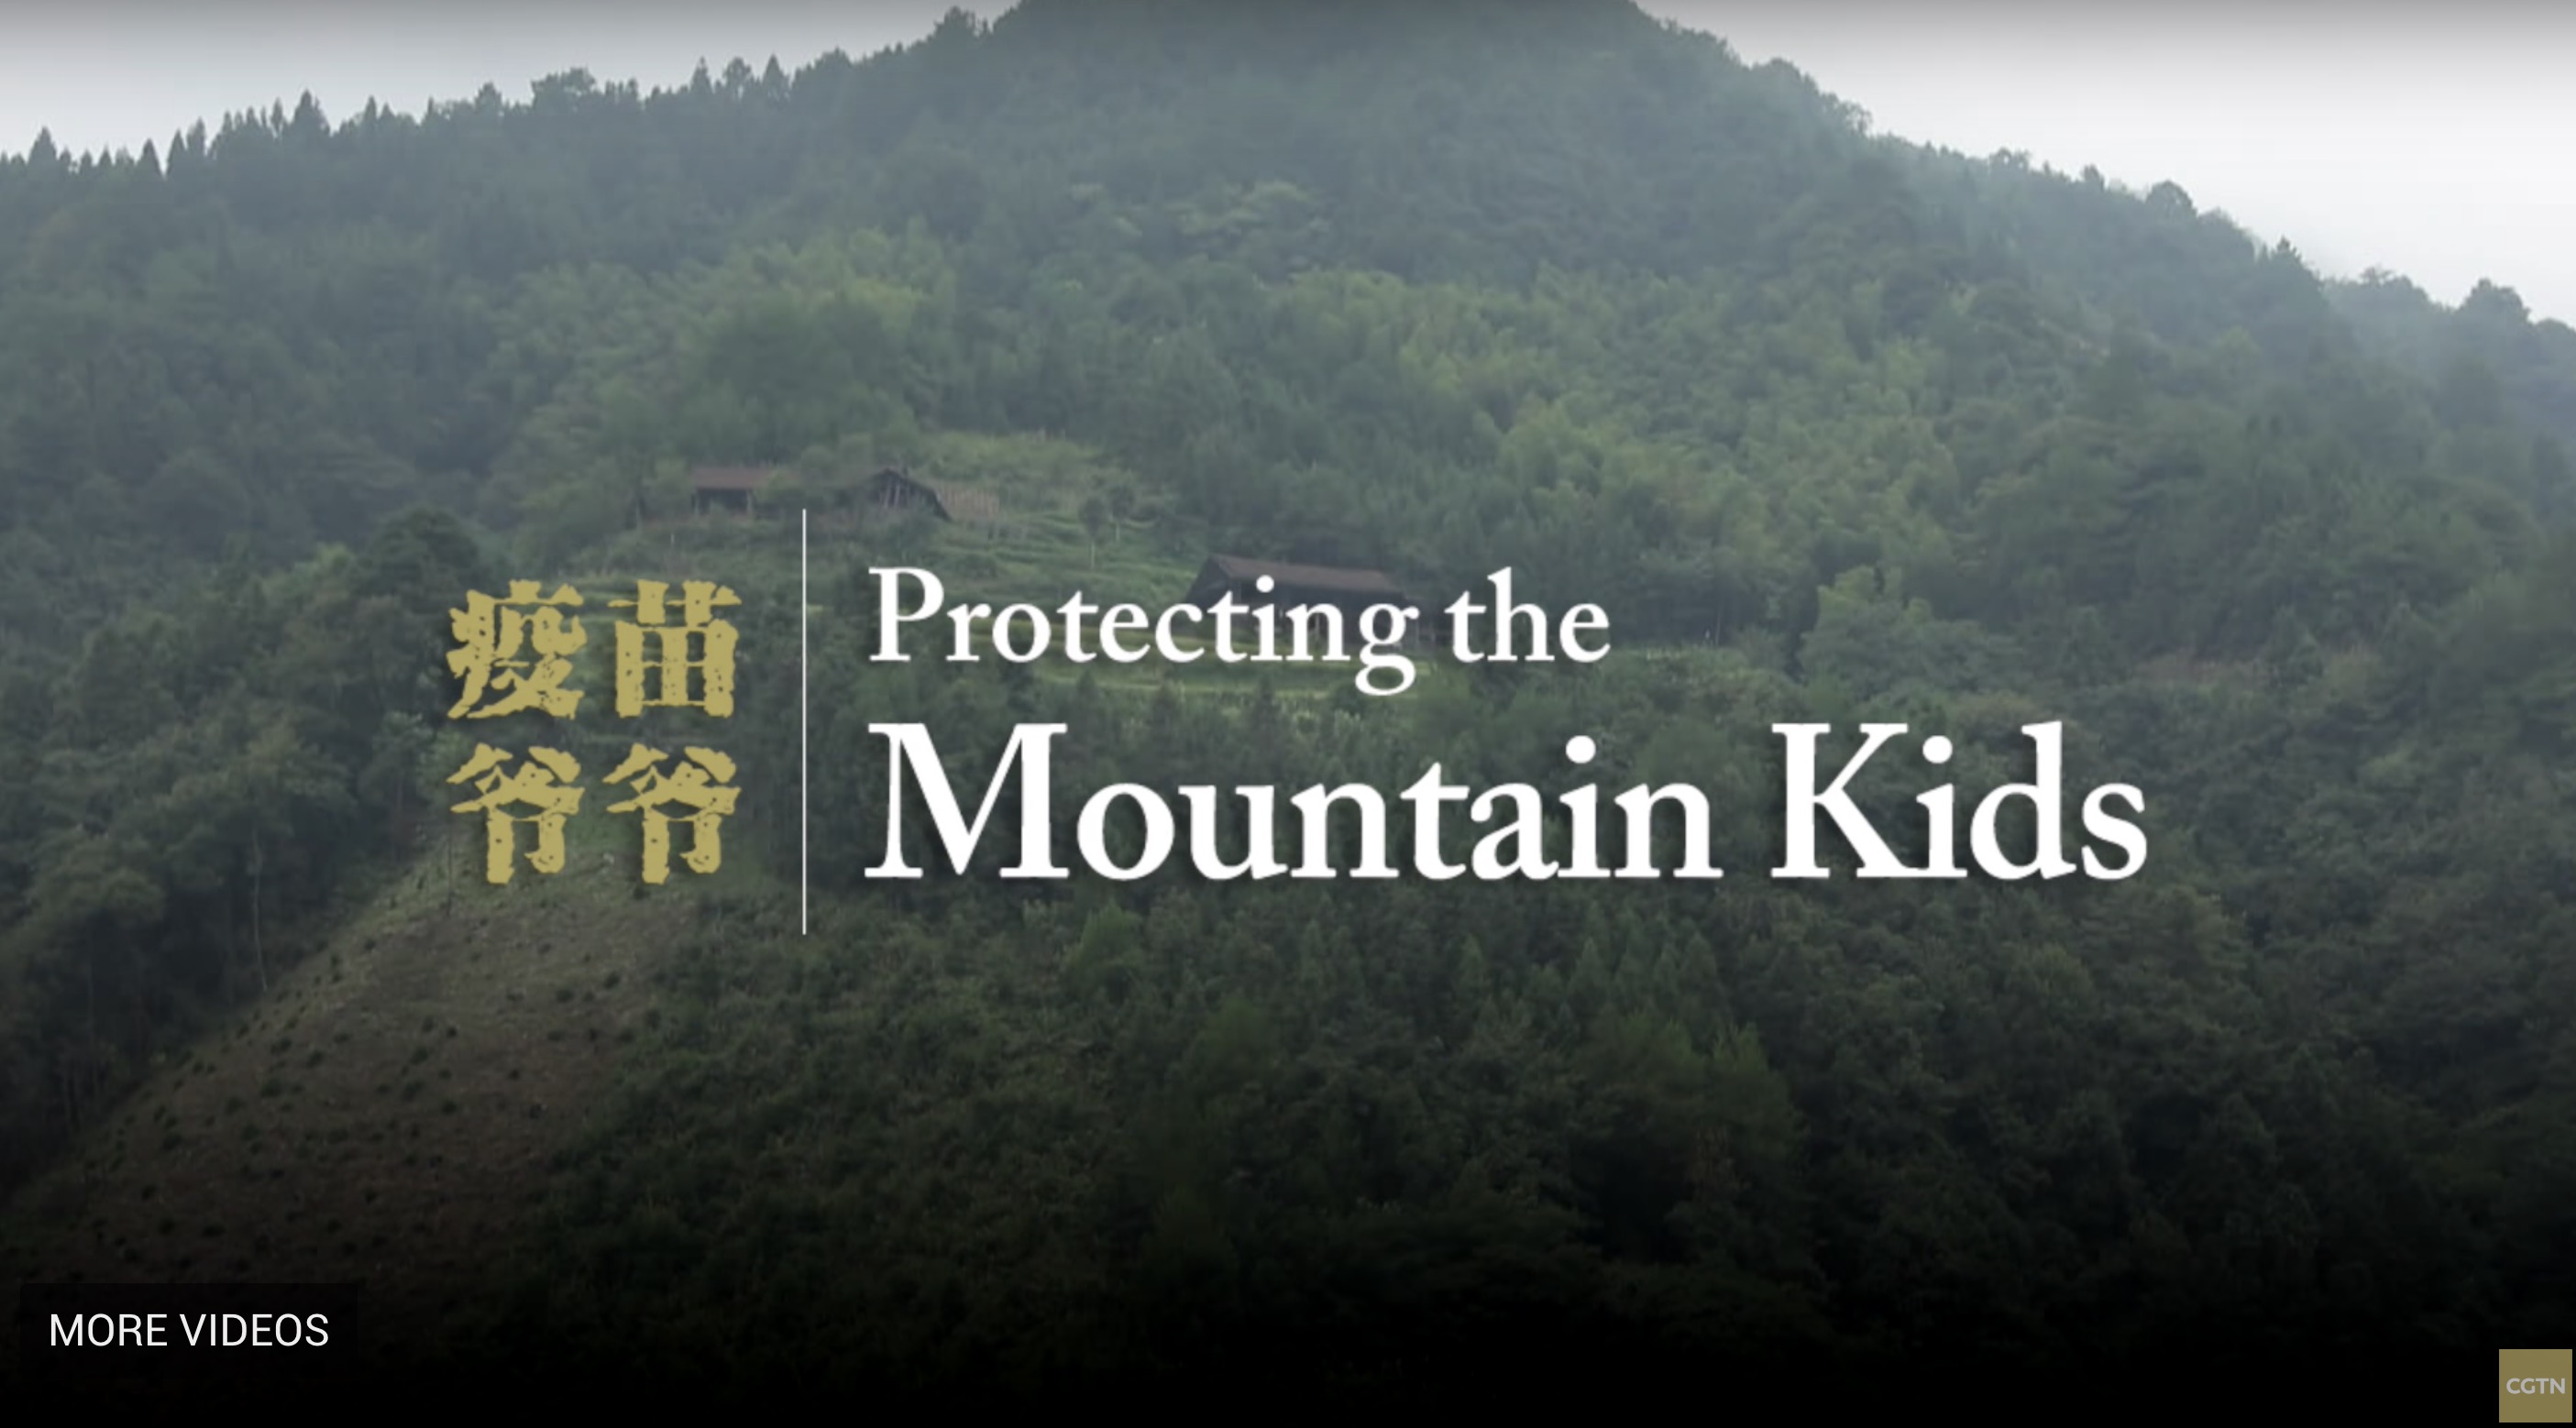 PROTECTING THE MOUNTAIN KIDS